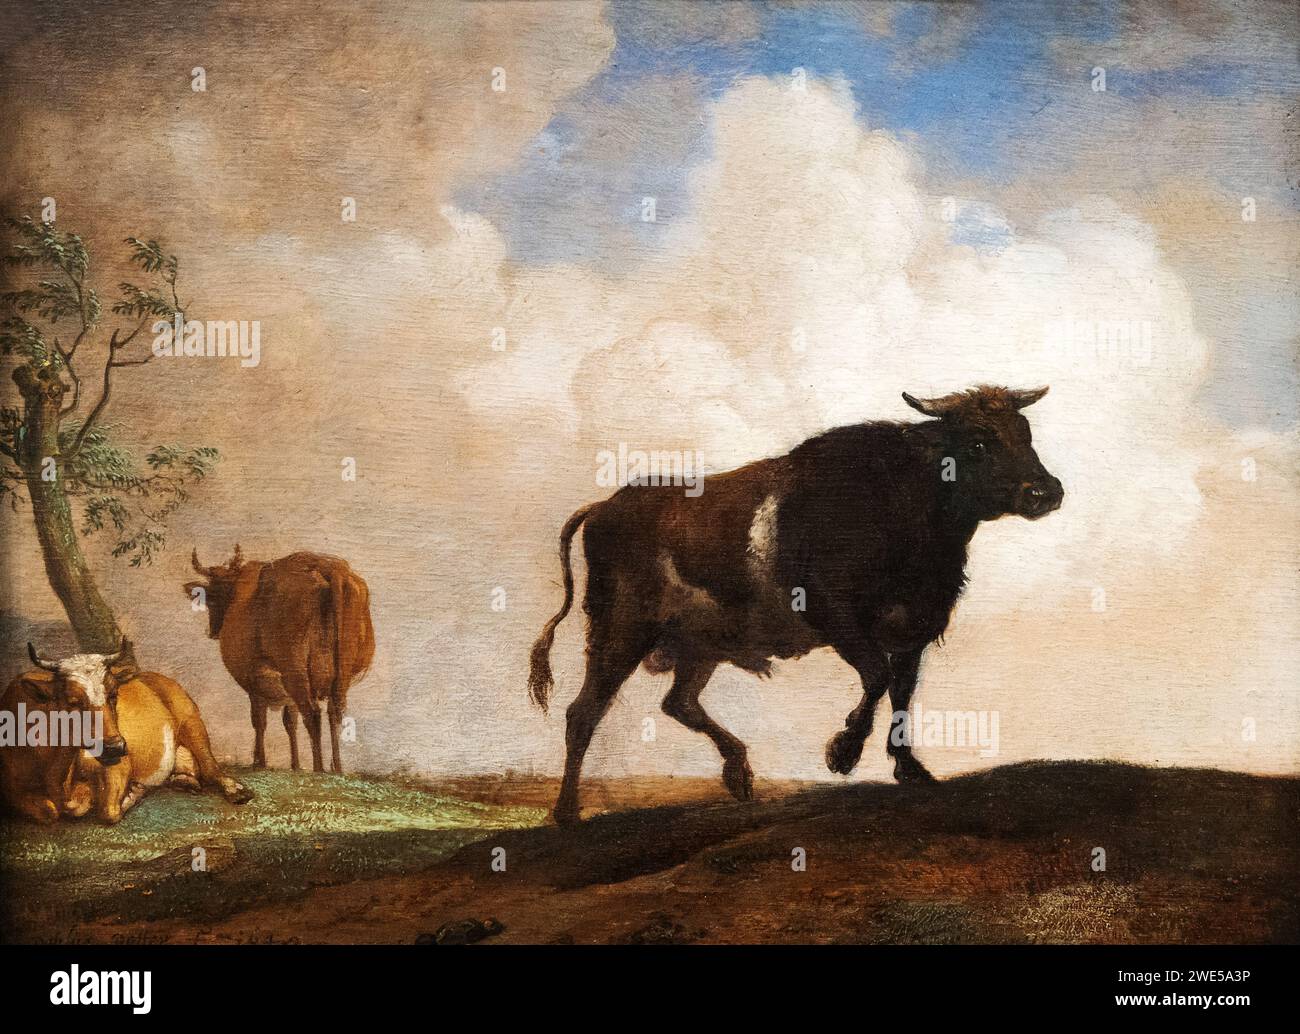 Paulus Potter painting, 'The Bull', 1649. 17th century Dutch animal and cattle painter, 1625-1654 Stock Photo